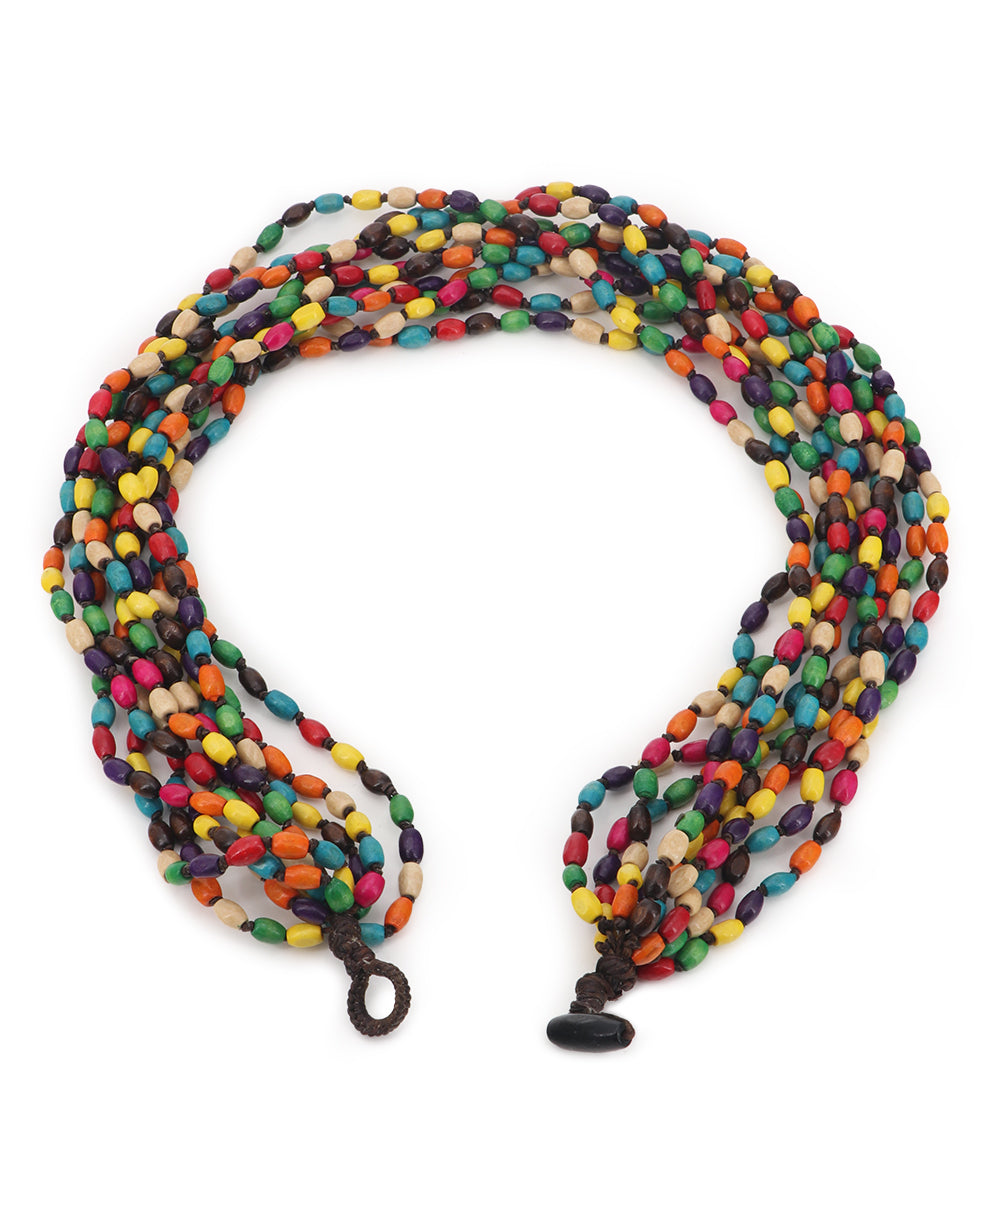 10 strands of boxwood beads in multi-color tone create this necklace